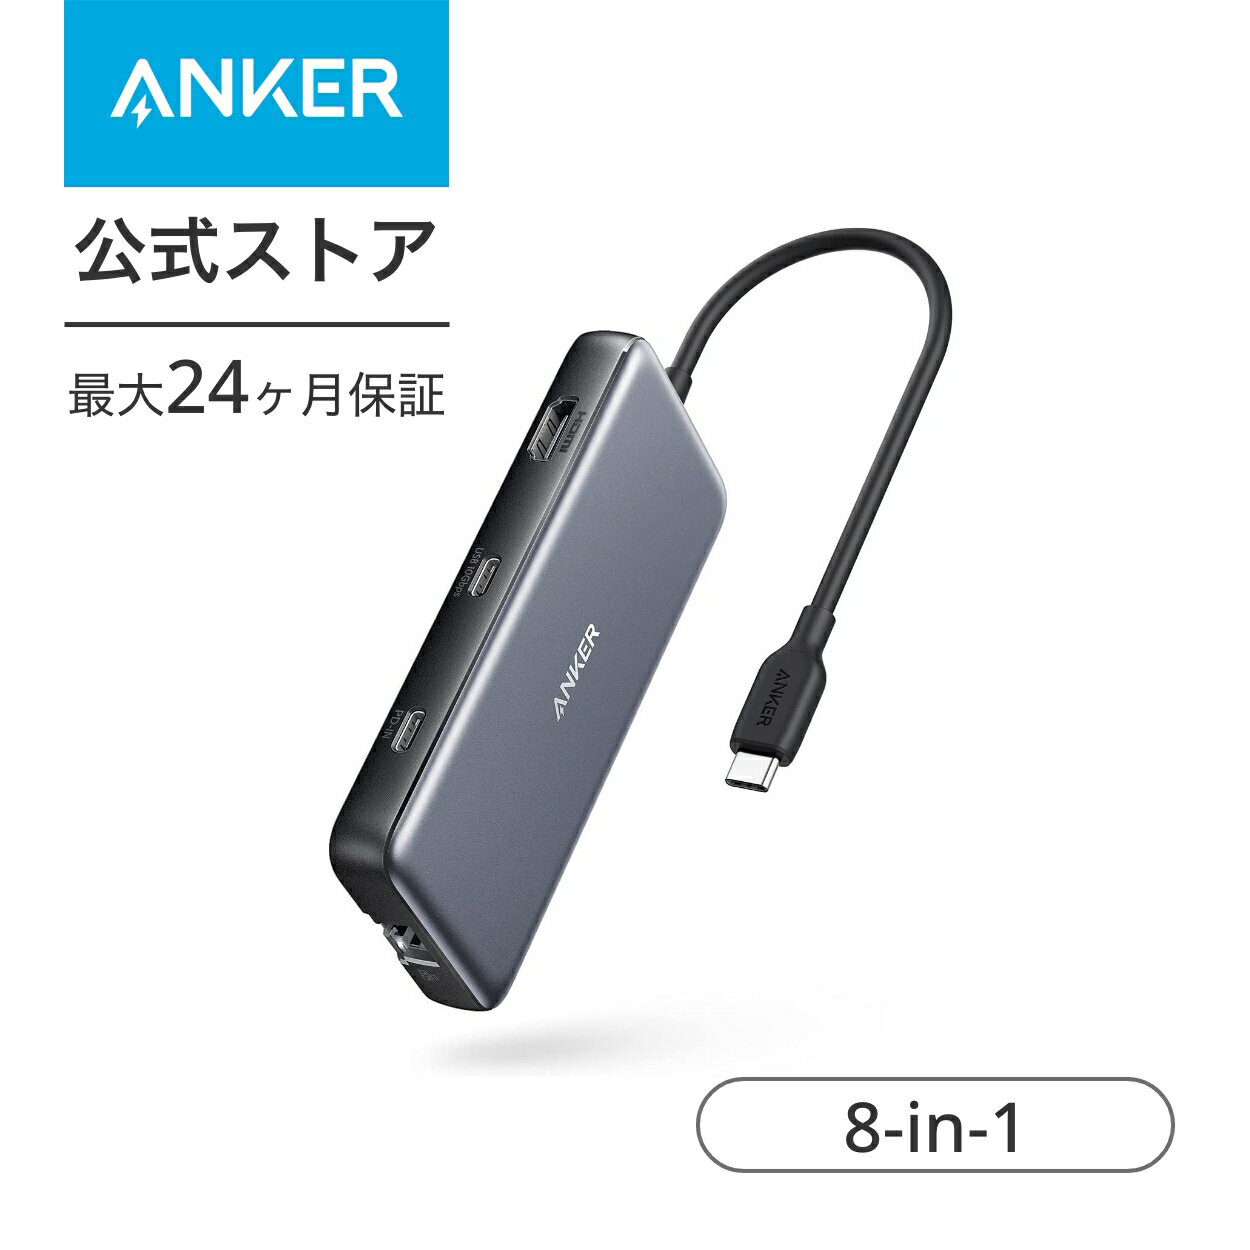 Anker PowerExpand 8-in-1 USB-C PD 10Gbps ǡ ϥ 100W USB Power Deliver...